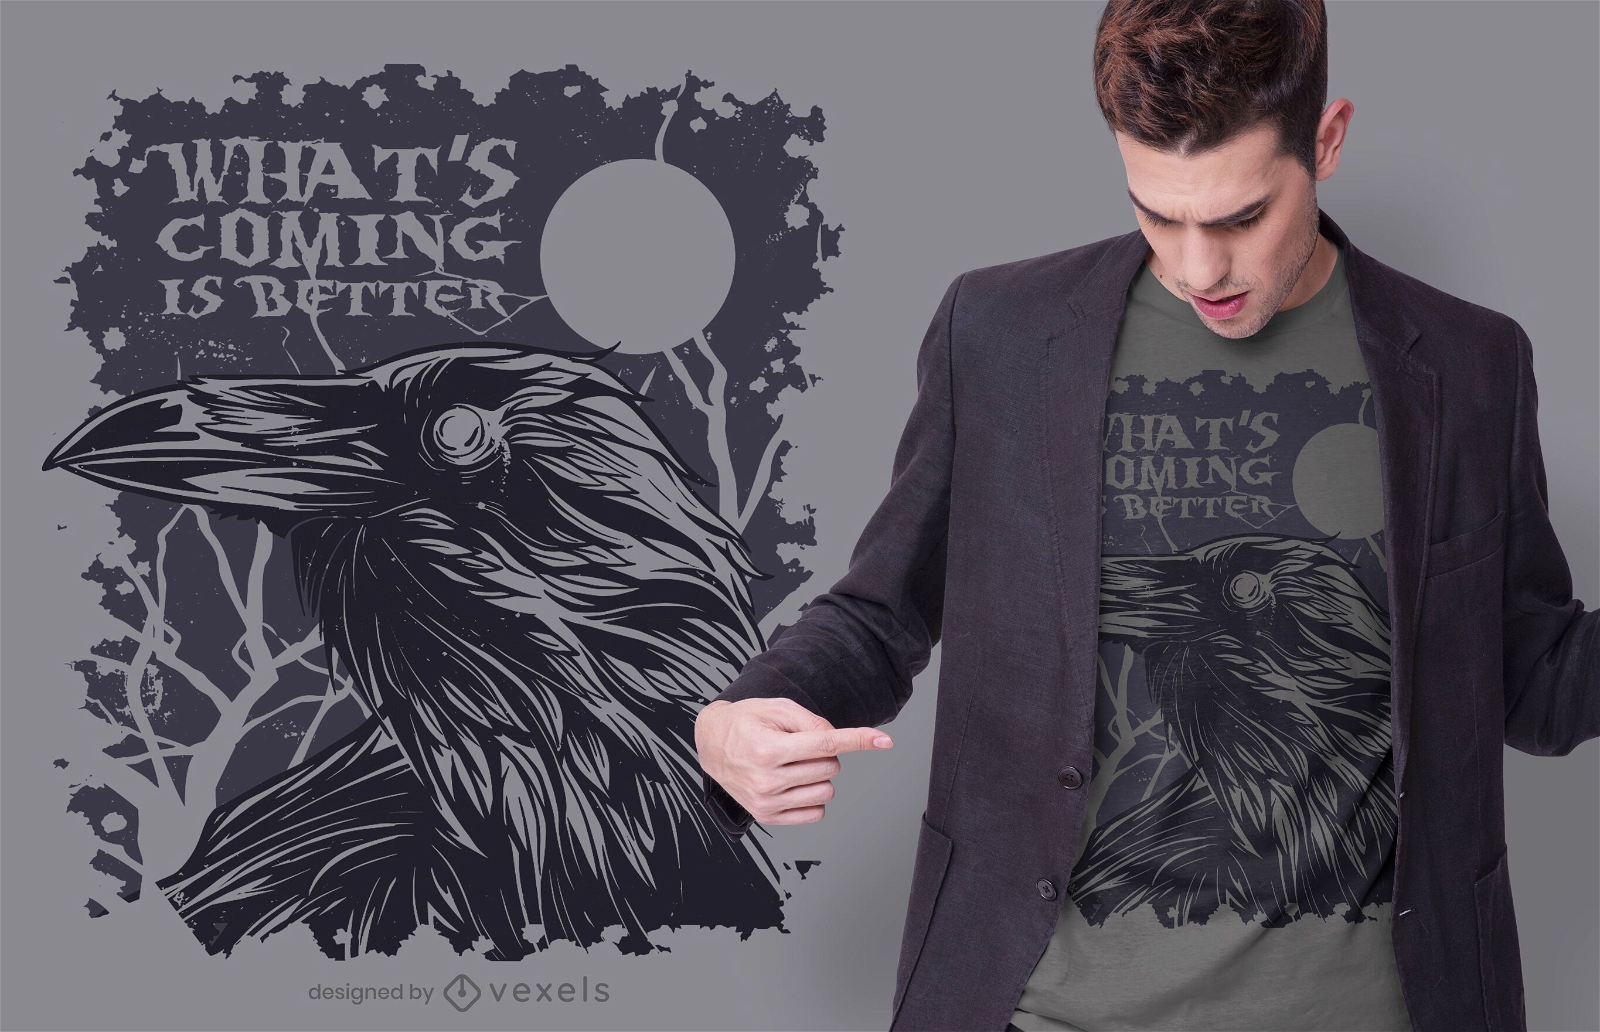 What's coming is better t-shirt design